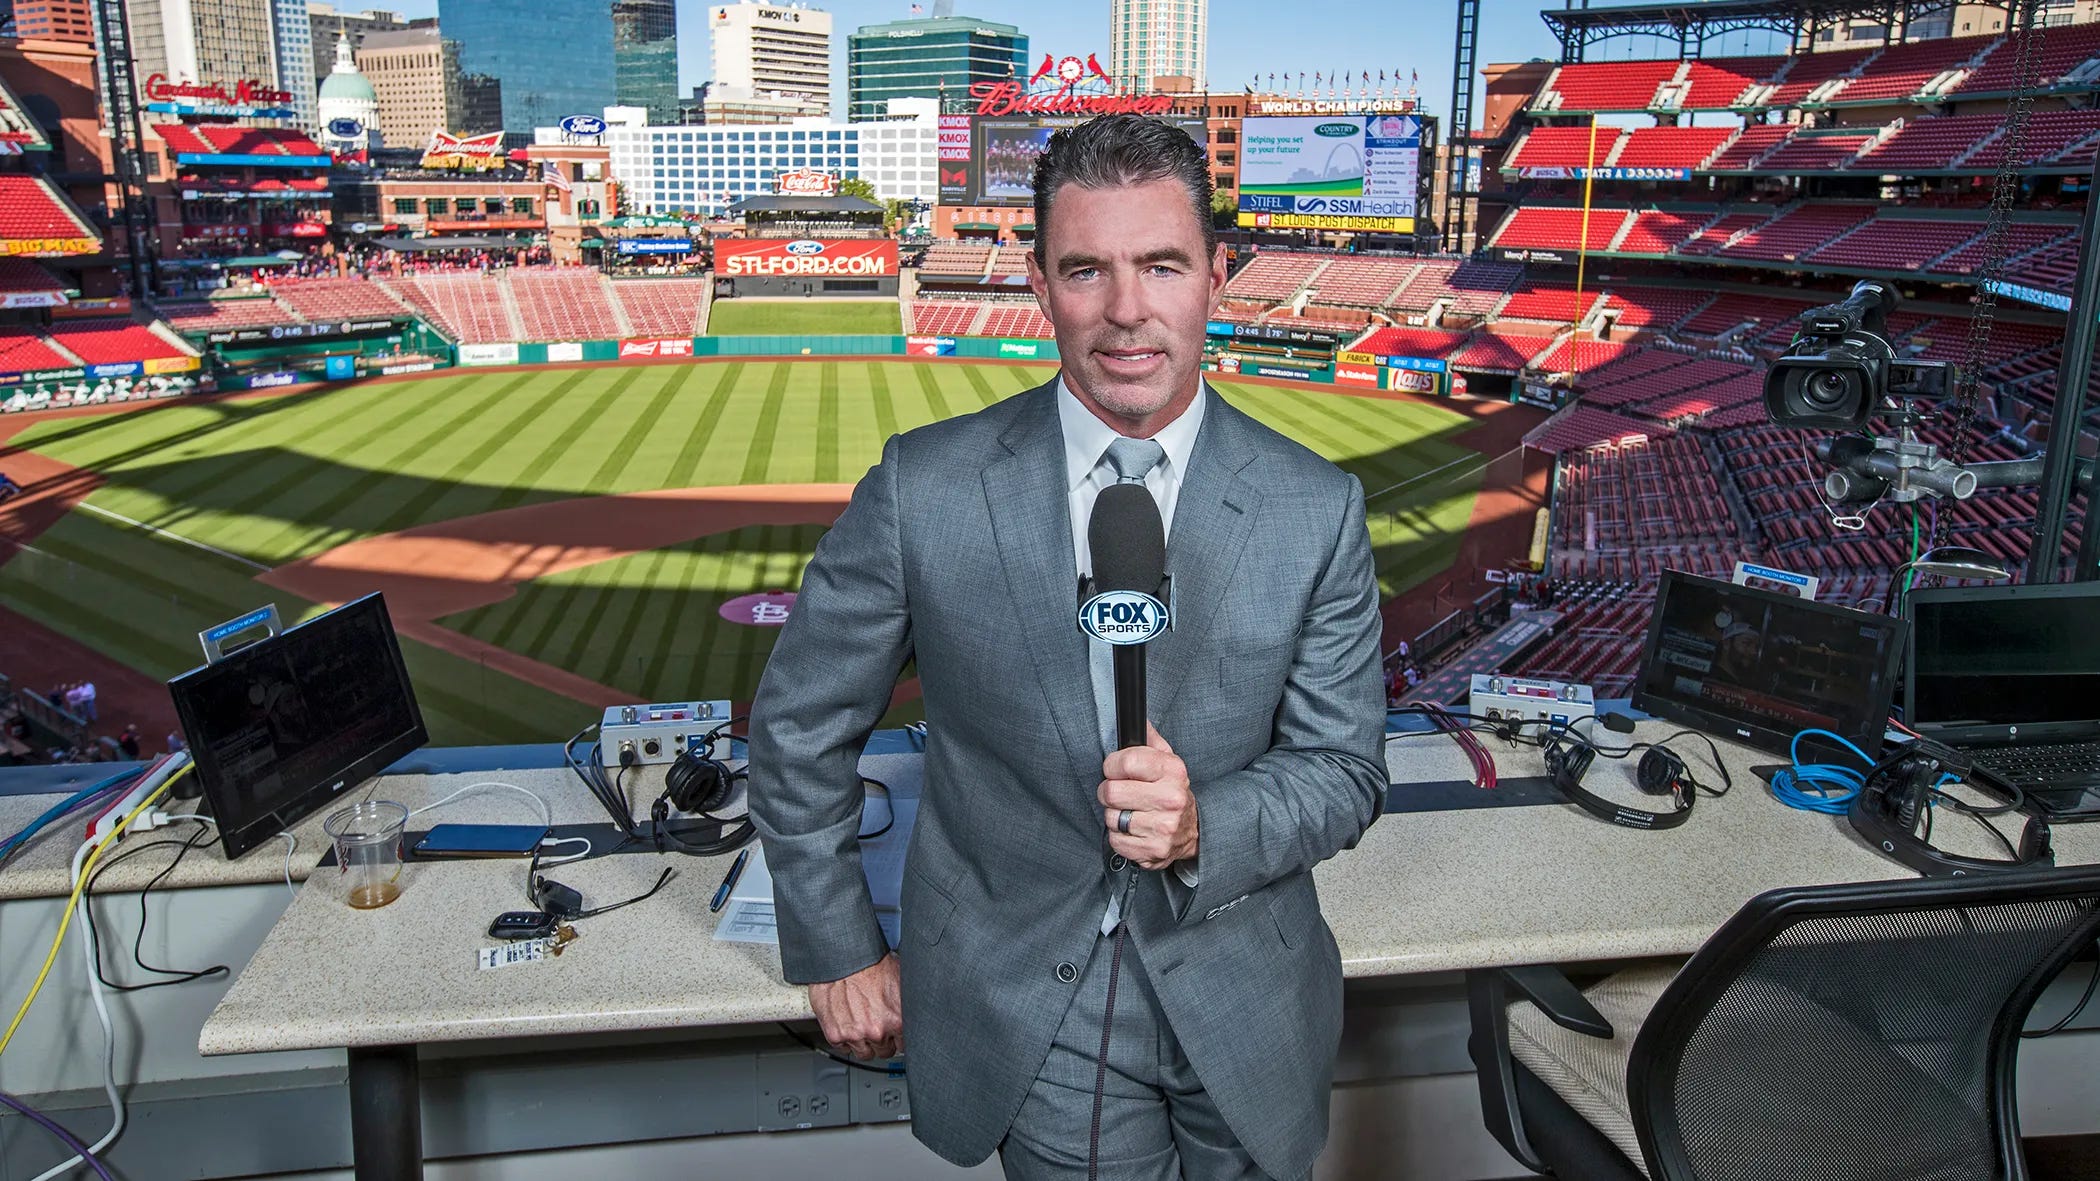 A Quick Word: You can dislike Jim Edmonds' commentary without